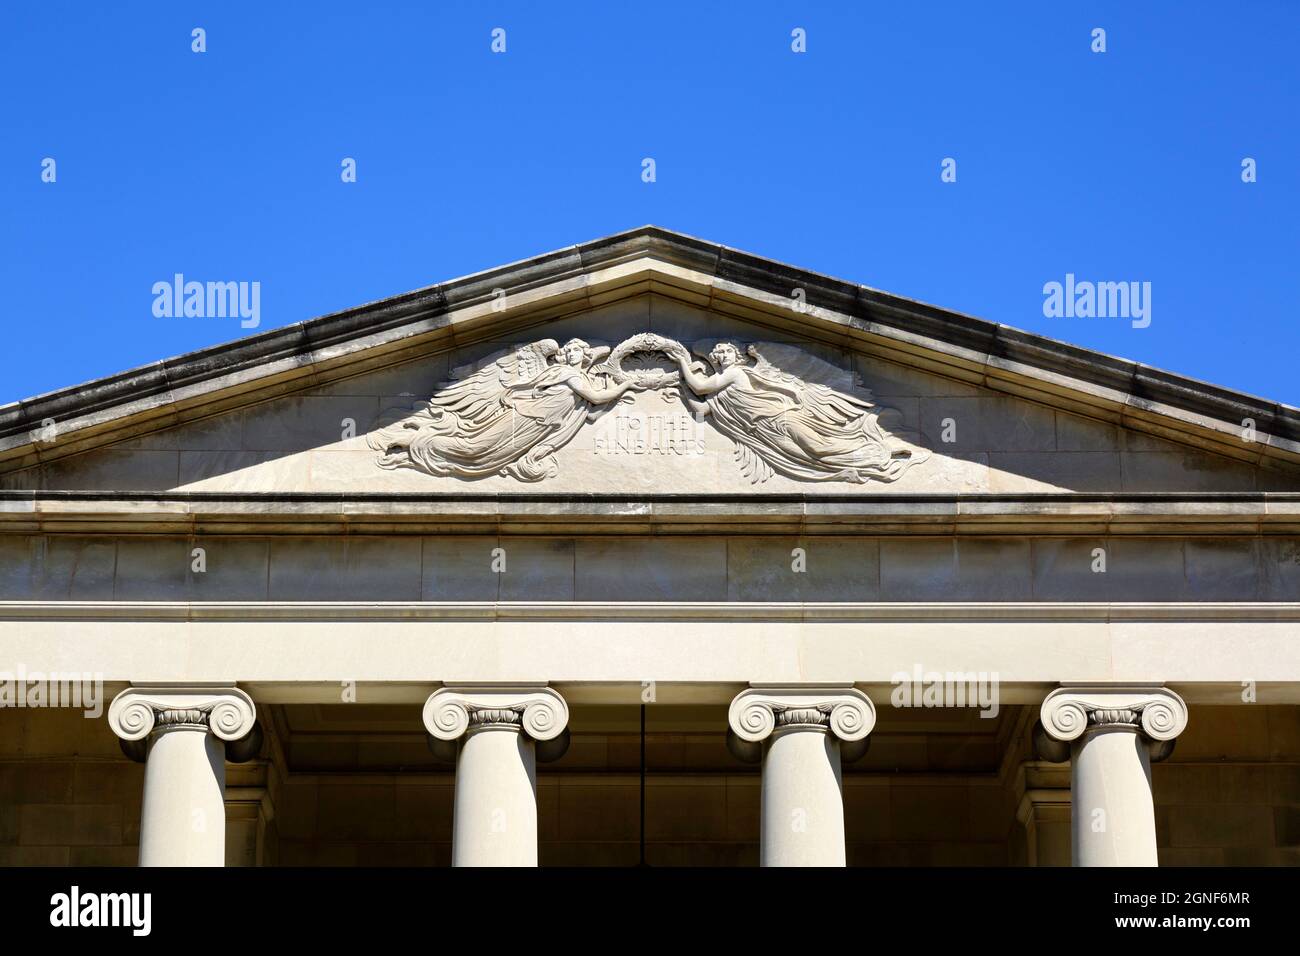 Detail of stone carvings and "To The Fine Arts" inscription on the tympanum above the Baltimore Museum of Art (BMA) entrance, Baltimore, Maryland, USA Stock Photo